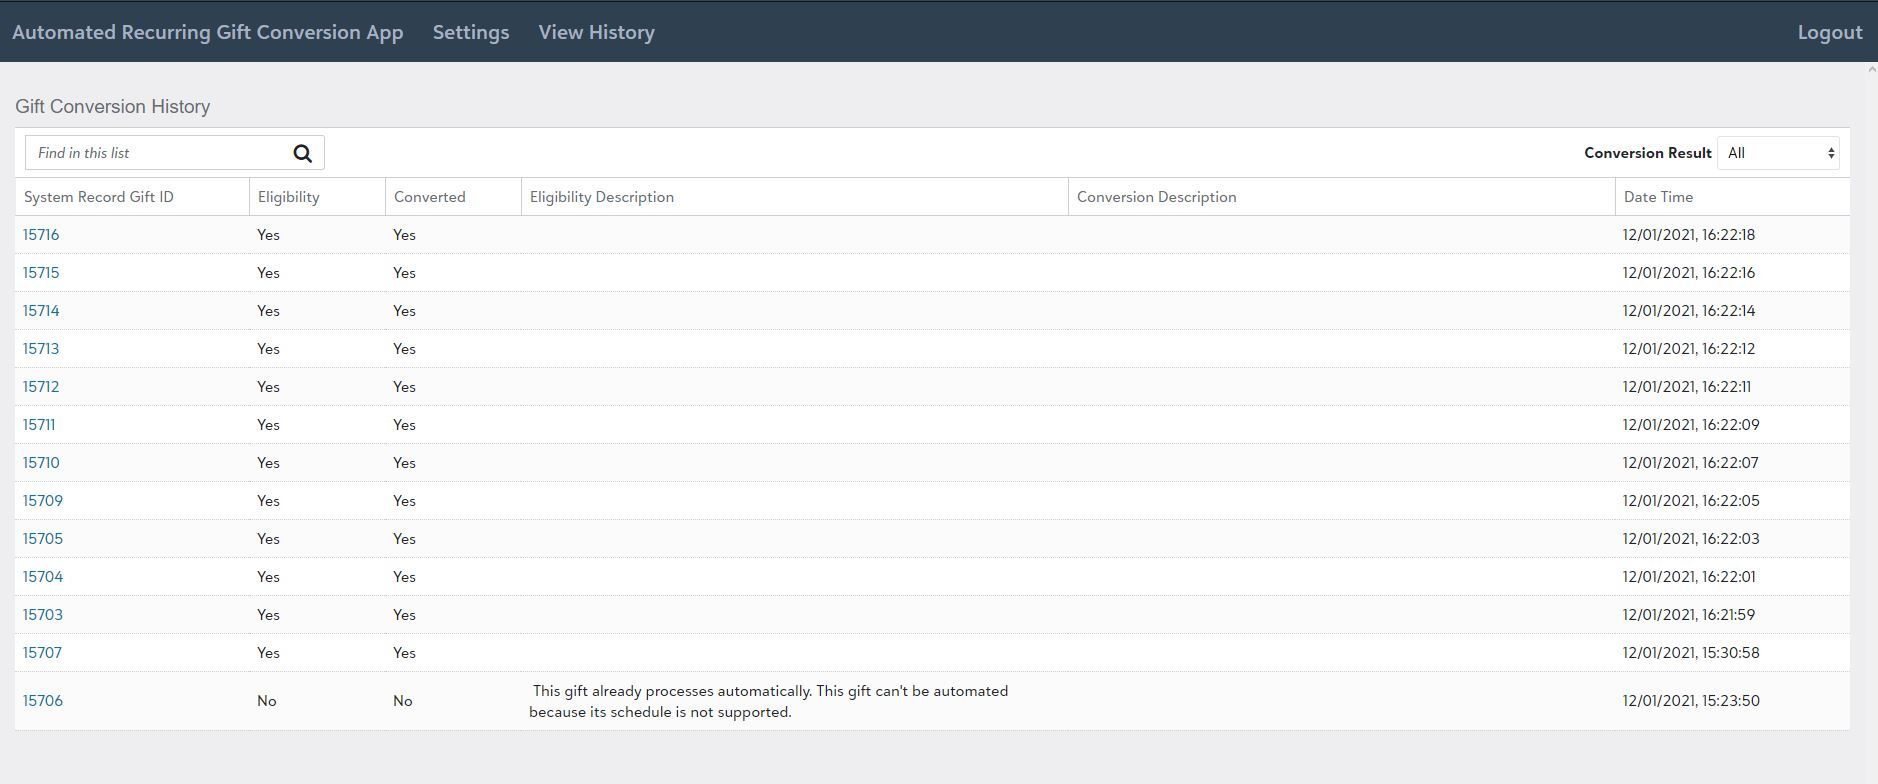 View History allows you to see the status of processed recurring gifts